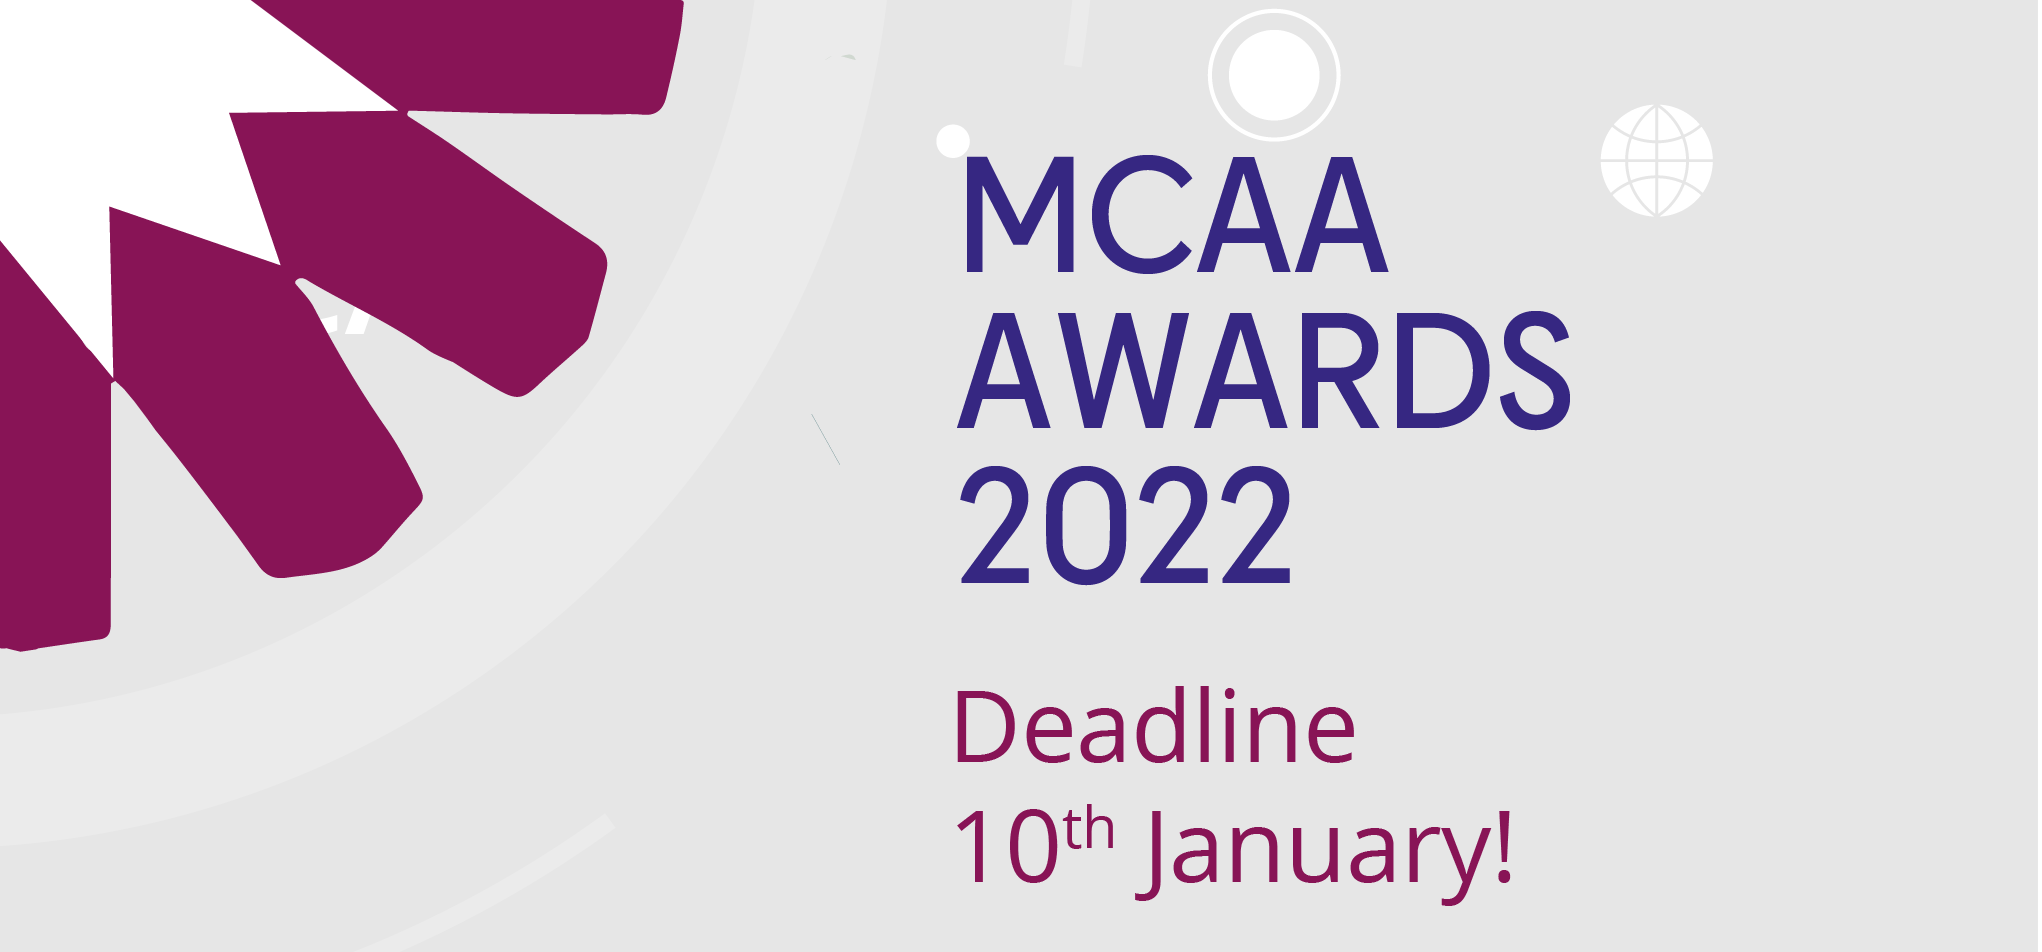 Propose someone for 2022 awards deadline 10 January